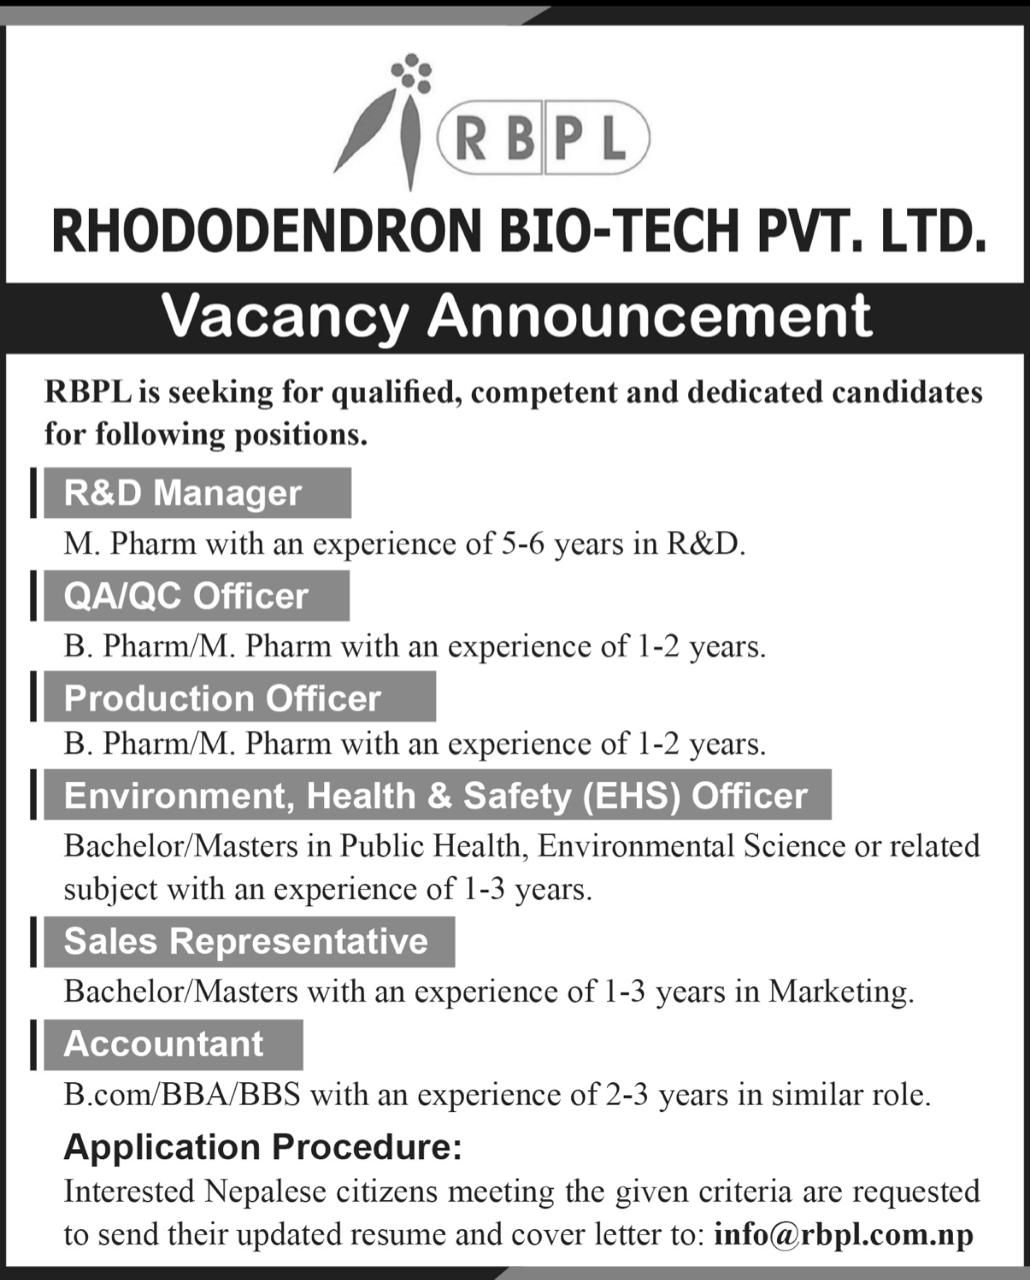 Job Availables, Rhododendron Biotech Pvt. Ltd Job Opening for R&D / QA / QC / Production / EHS / Sales / Accounts Department